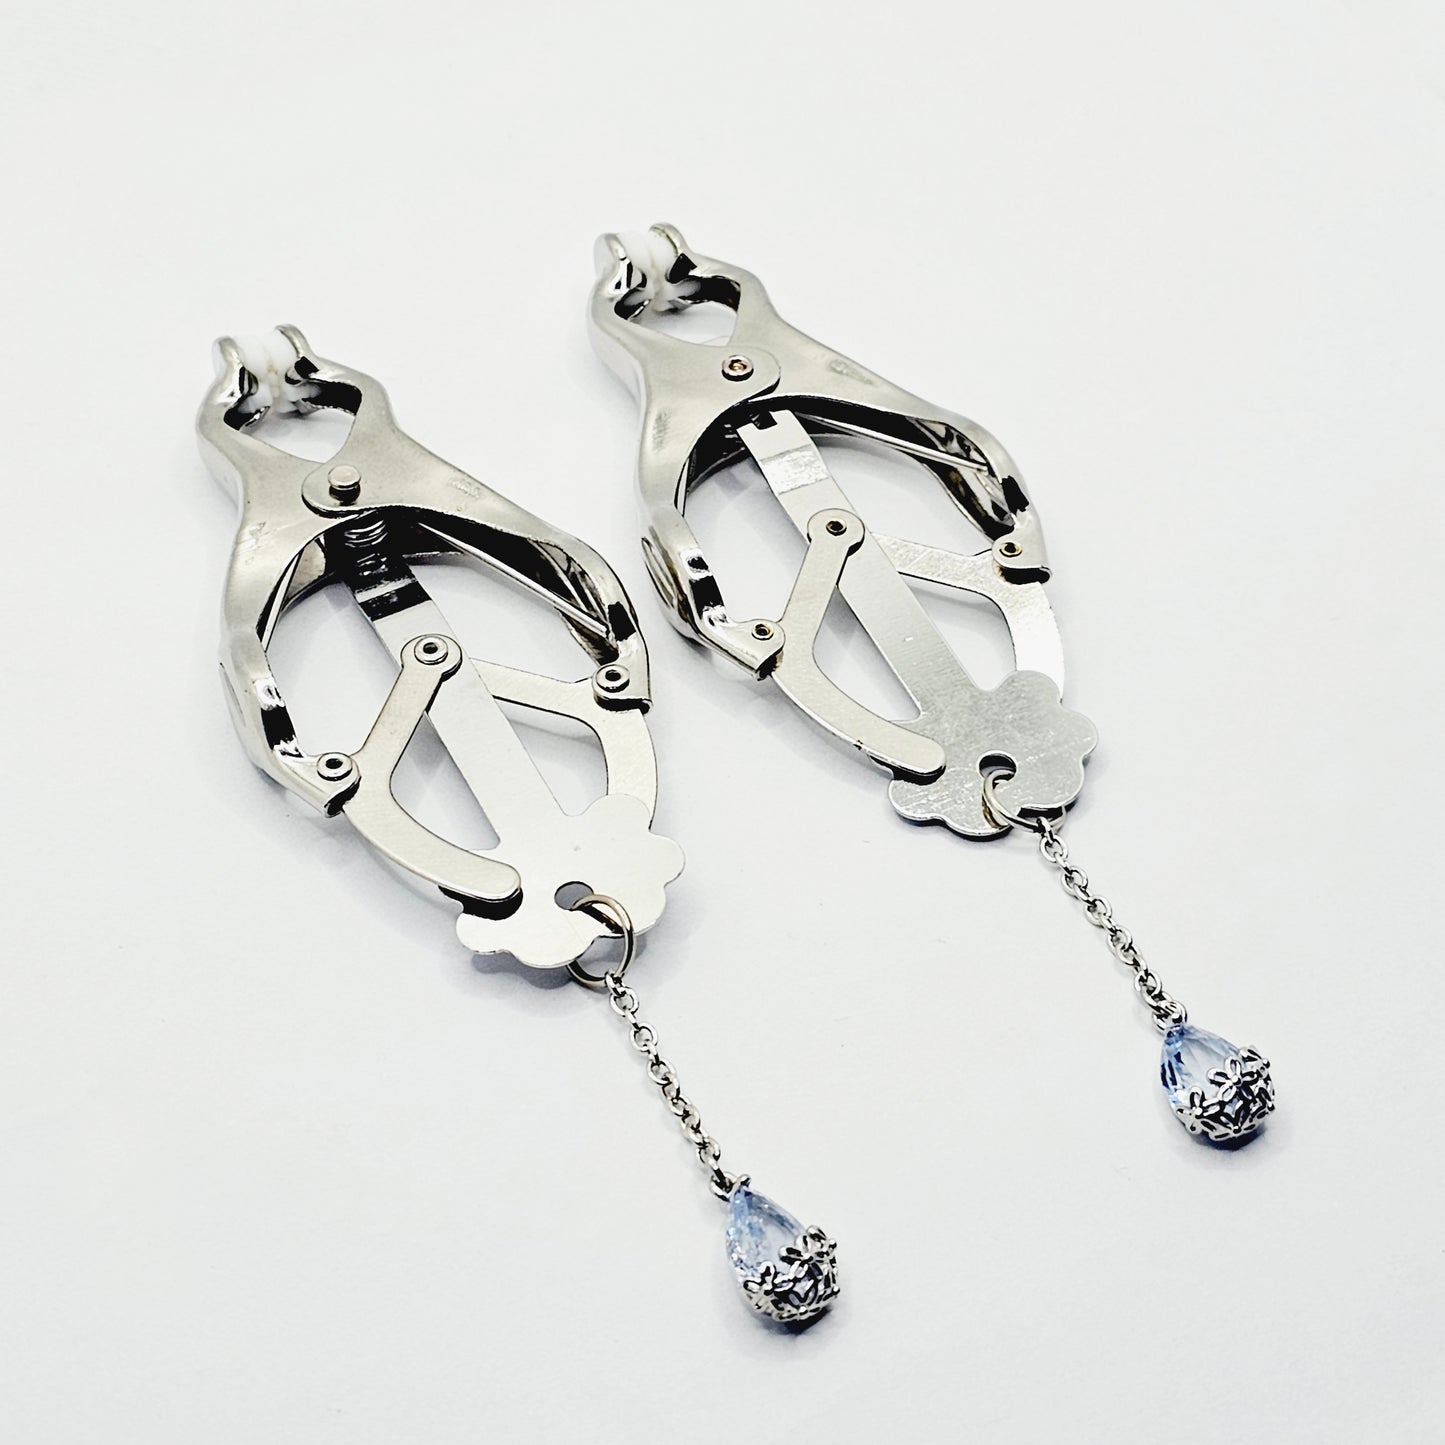 Non Piercing Nipple Dangles on Nipple Nooses or Clamps with Dazzling Cubic Zirconia Pendants.